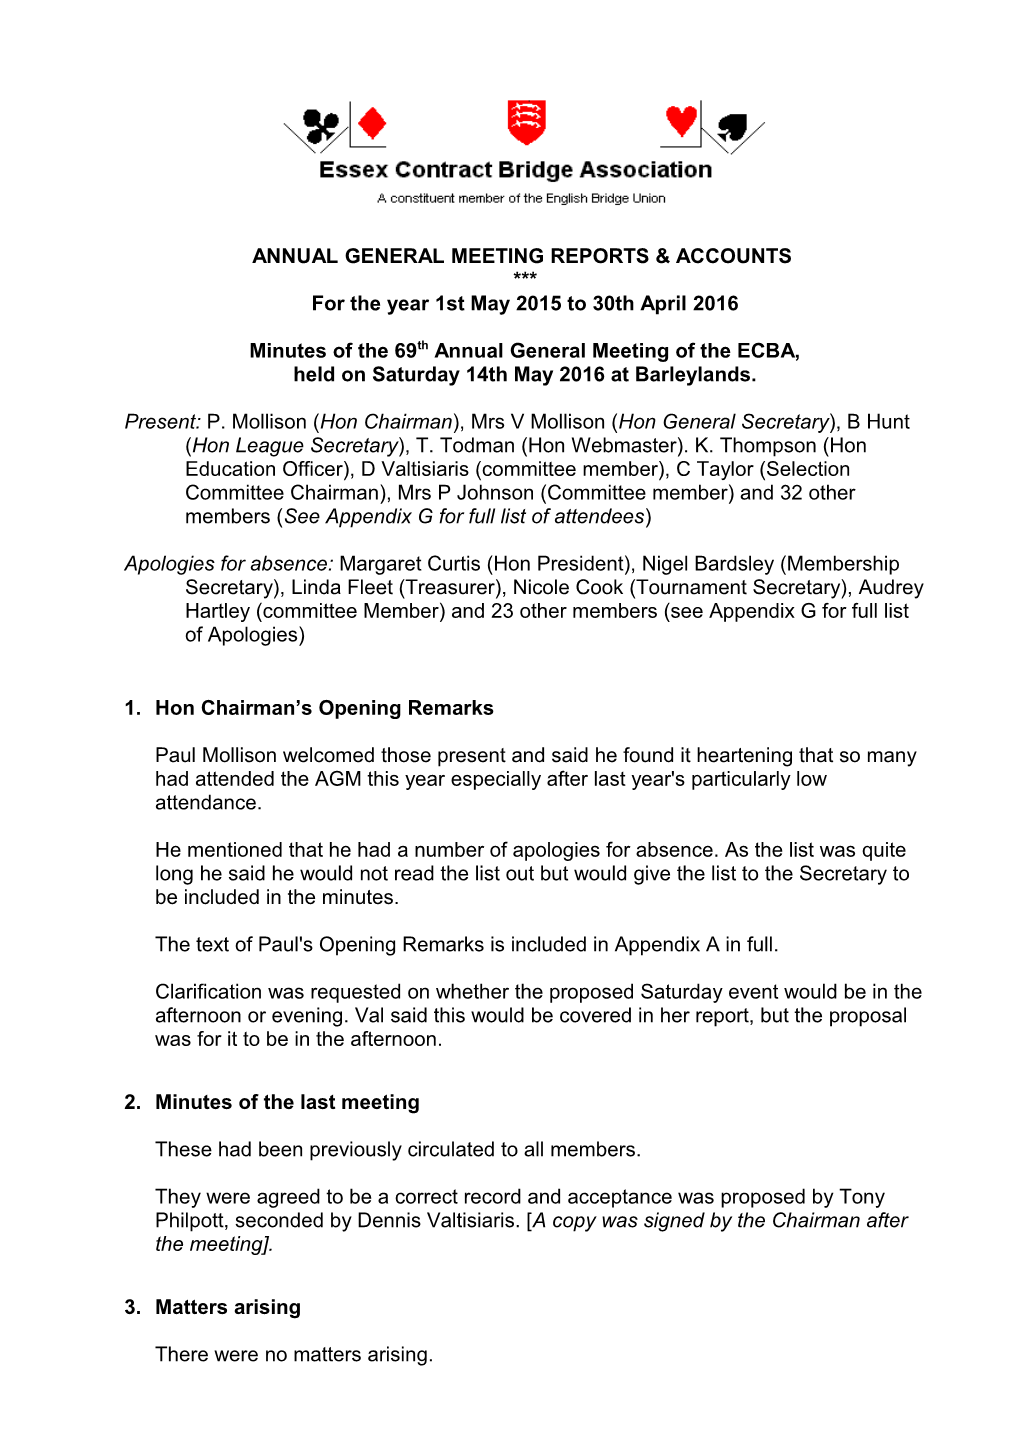 Annual General Meeting Reports & Accounts